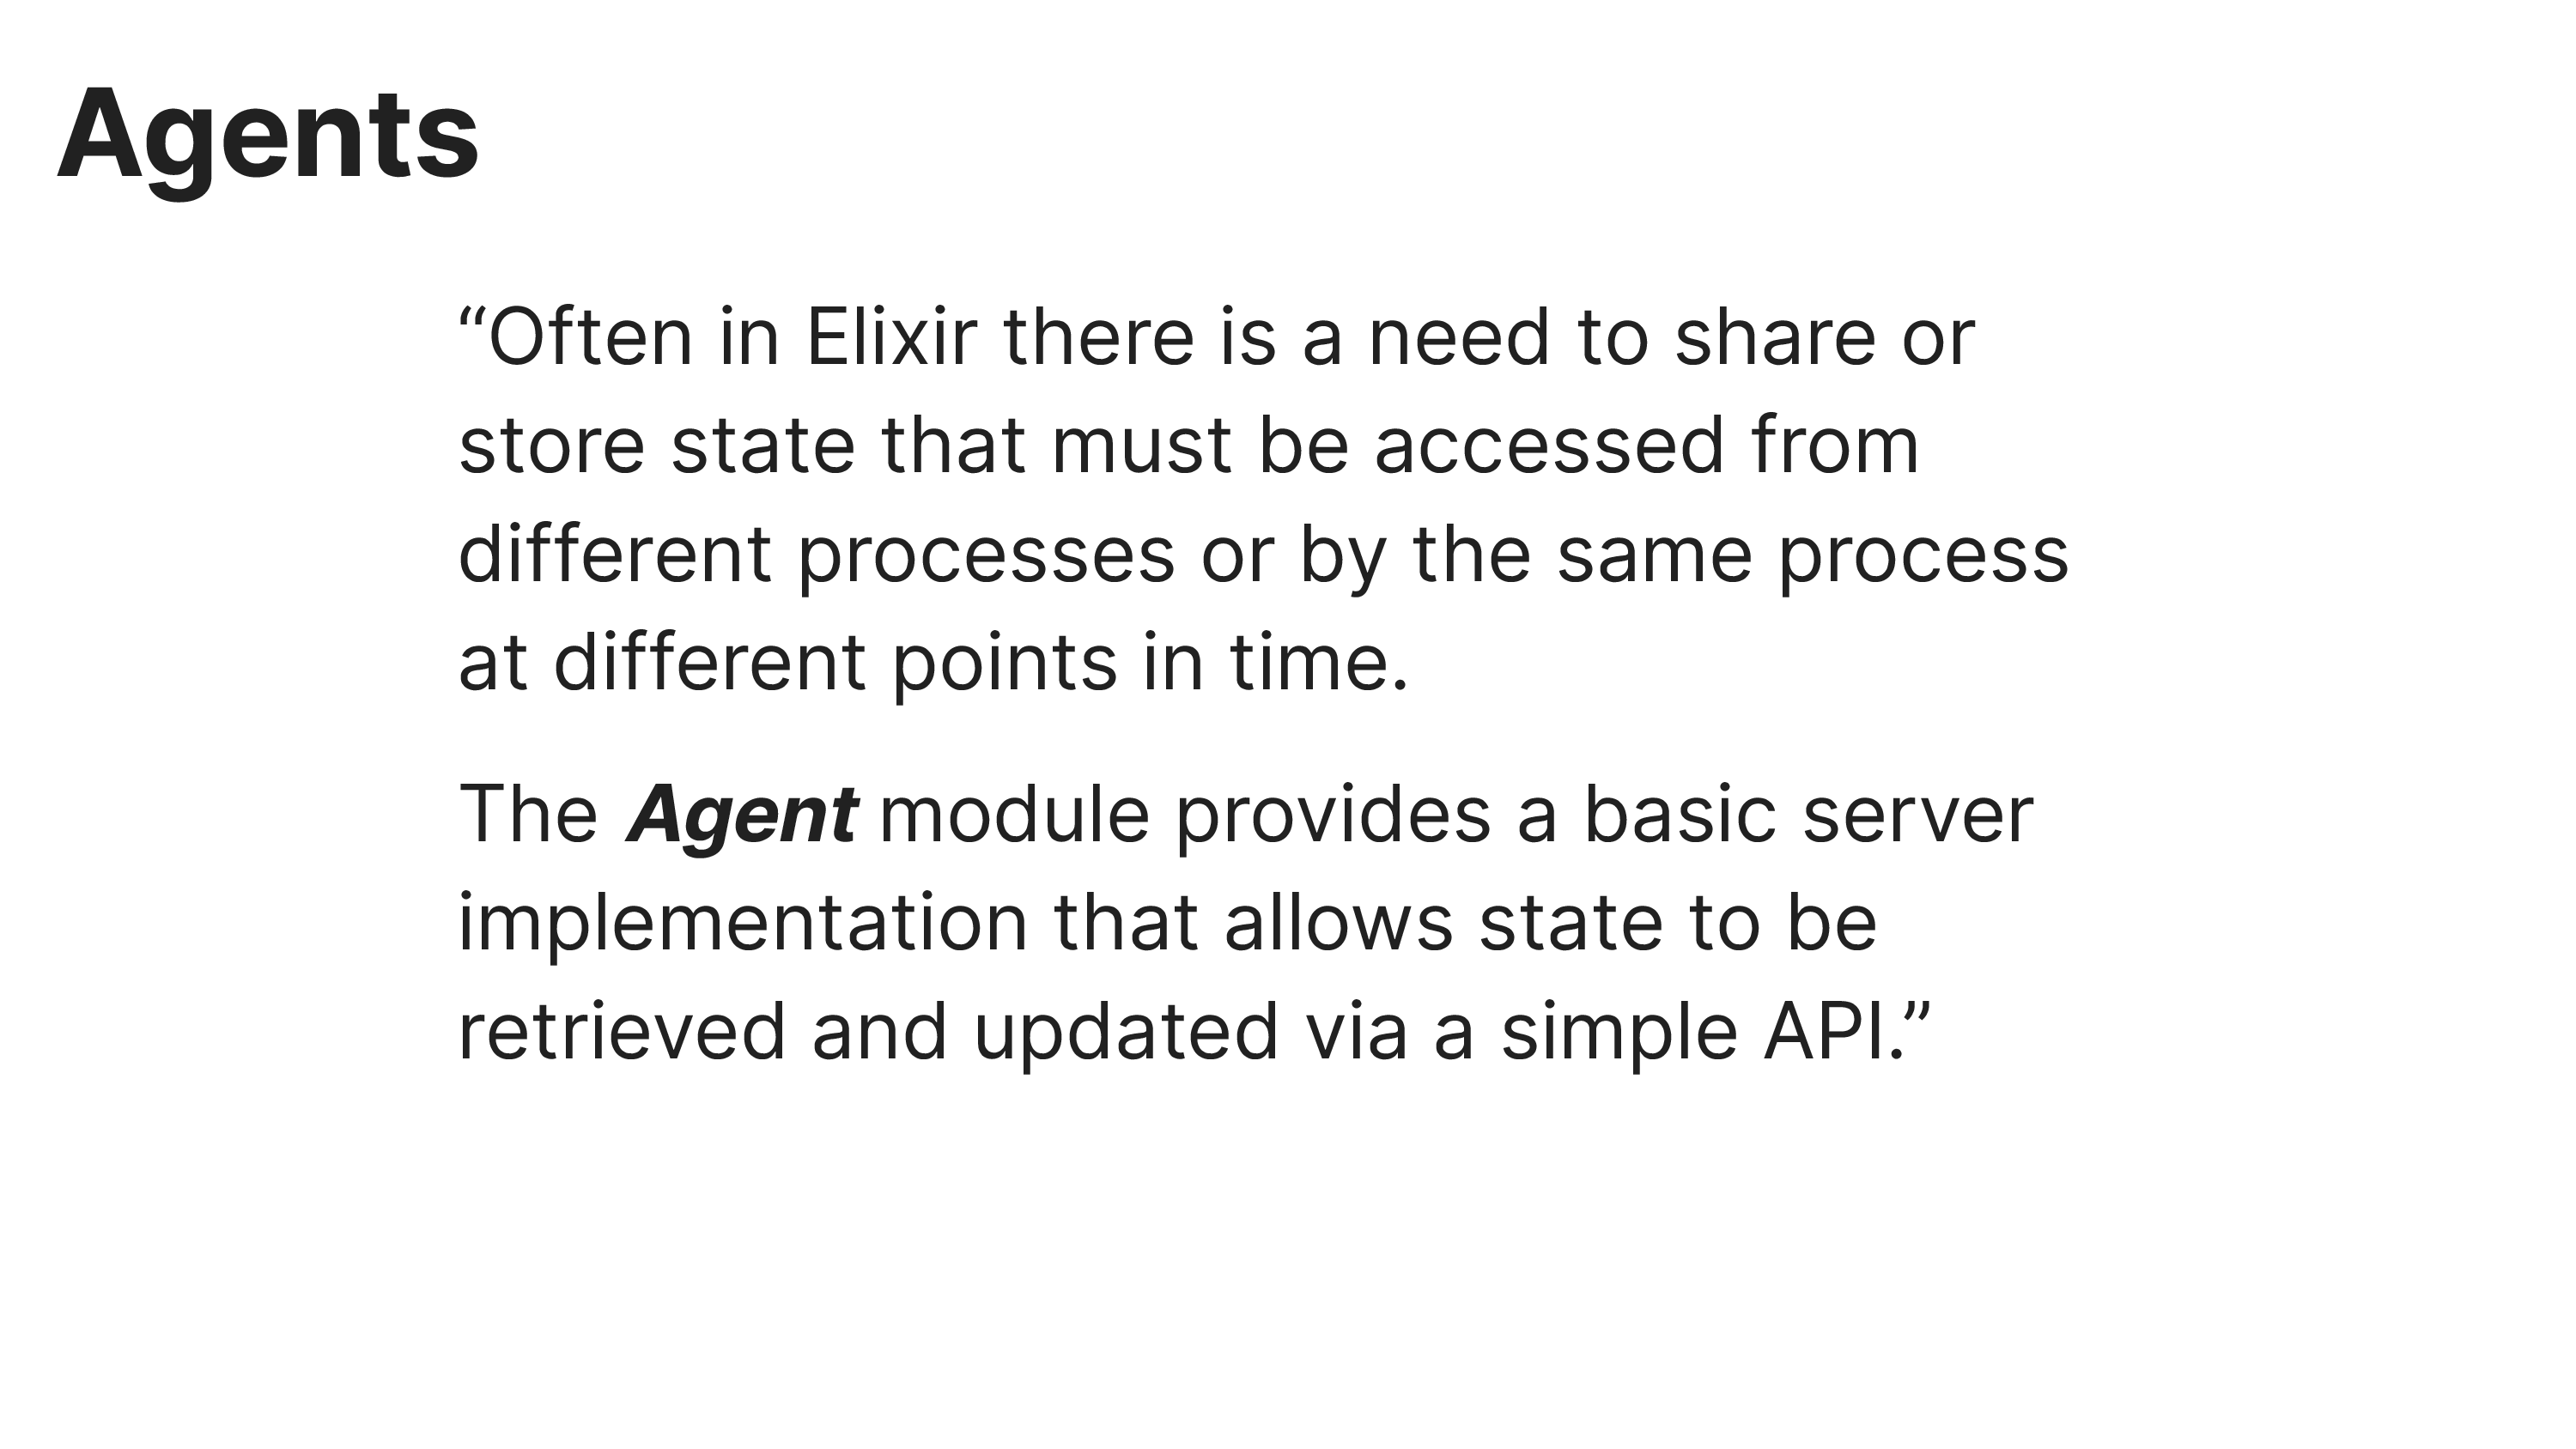 Agents
“Often in Elixir there is a need to share or
store state that must be accessed from
different processes or by the same process
at different points in time.
The Agent module provides a basic server
implementation that allows state to be
retrieved and updated via a simple API.”
